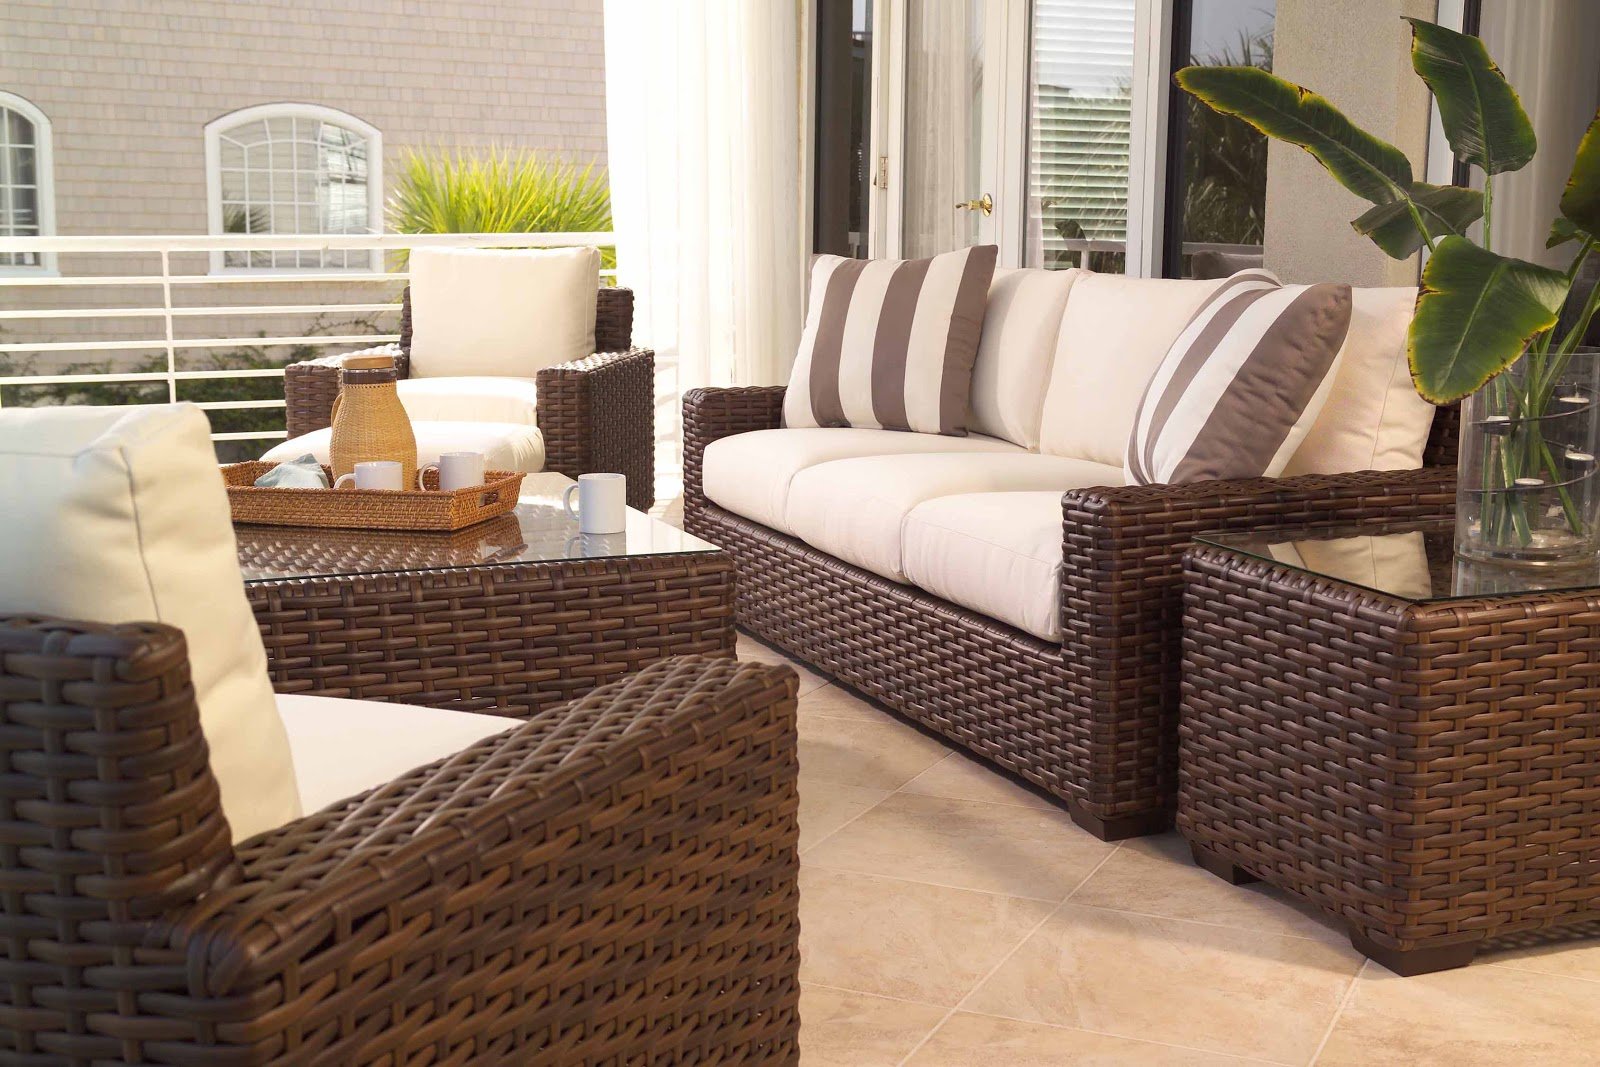 what you should look for in outdoor patio furniture that lasts